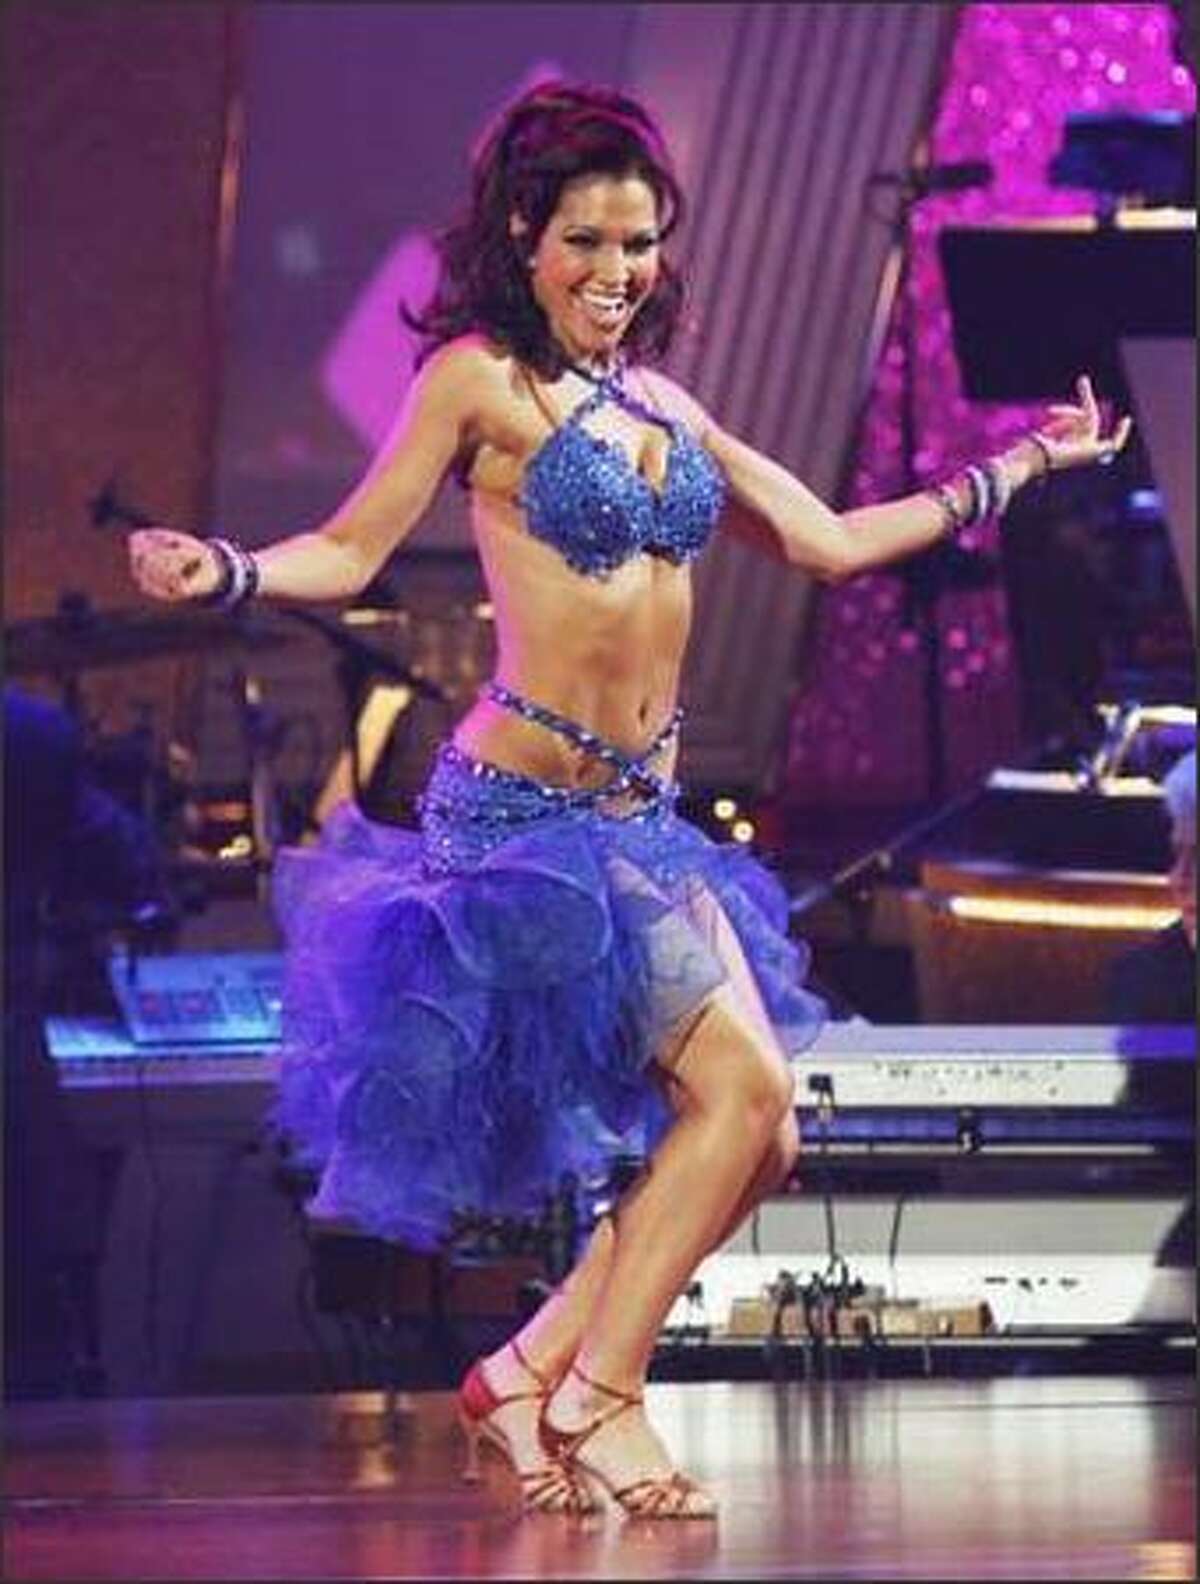 No. 99: TV personality Melissa Rycroft, 26 ("The Bachelor," "Dancing With The Stars").